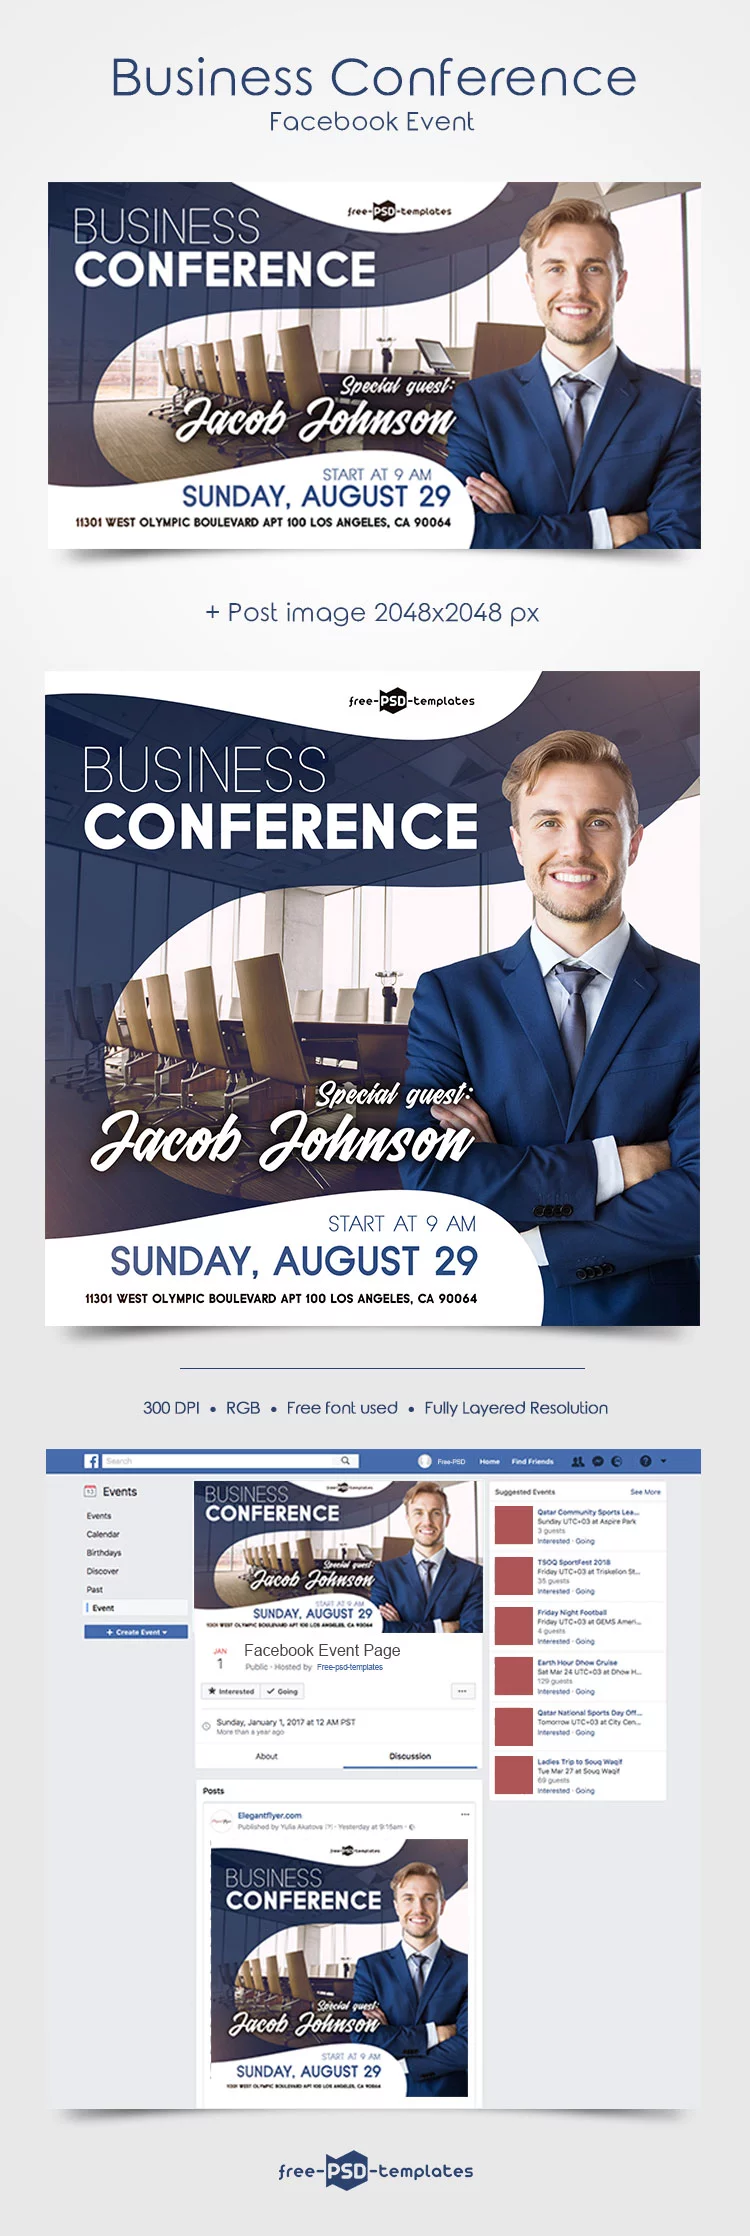 Free Business Conference Facebook Event Page